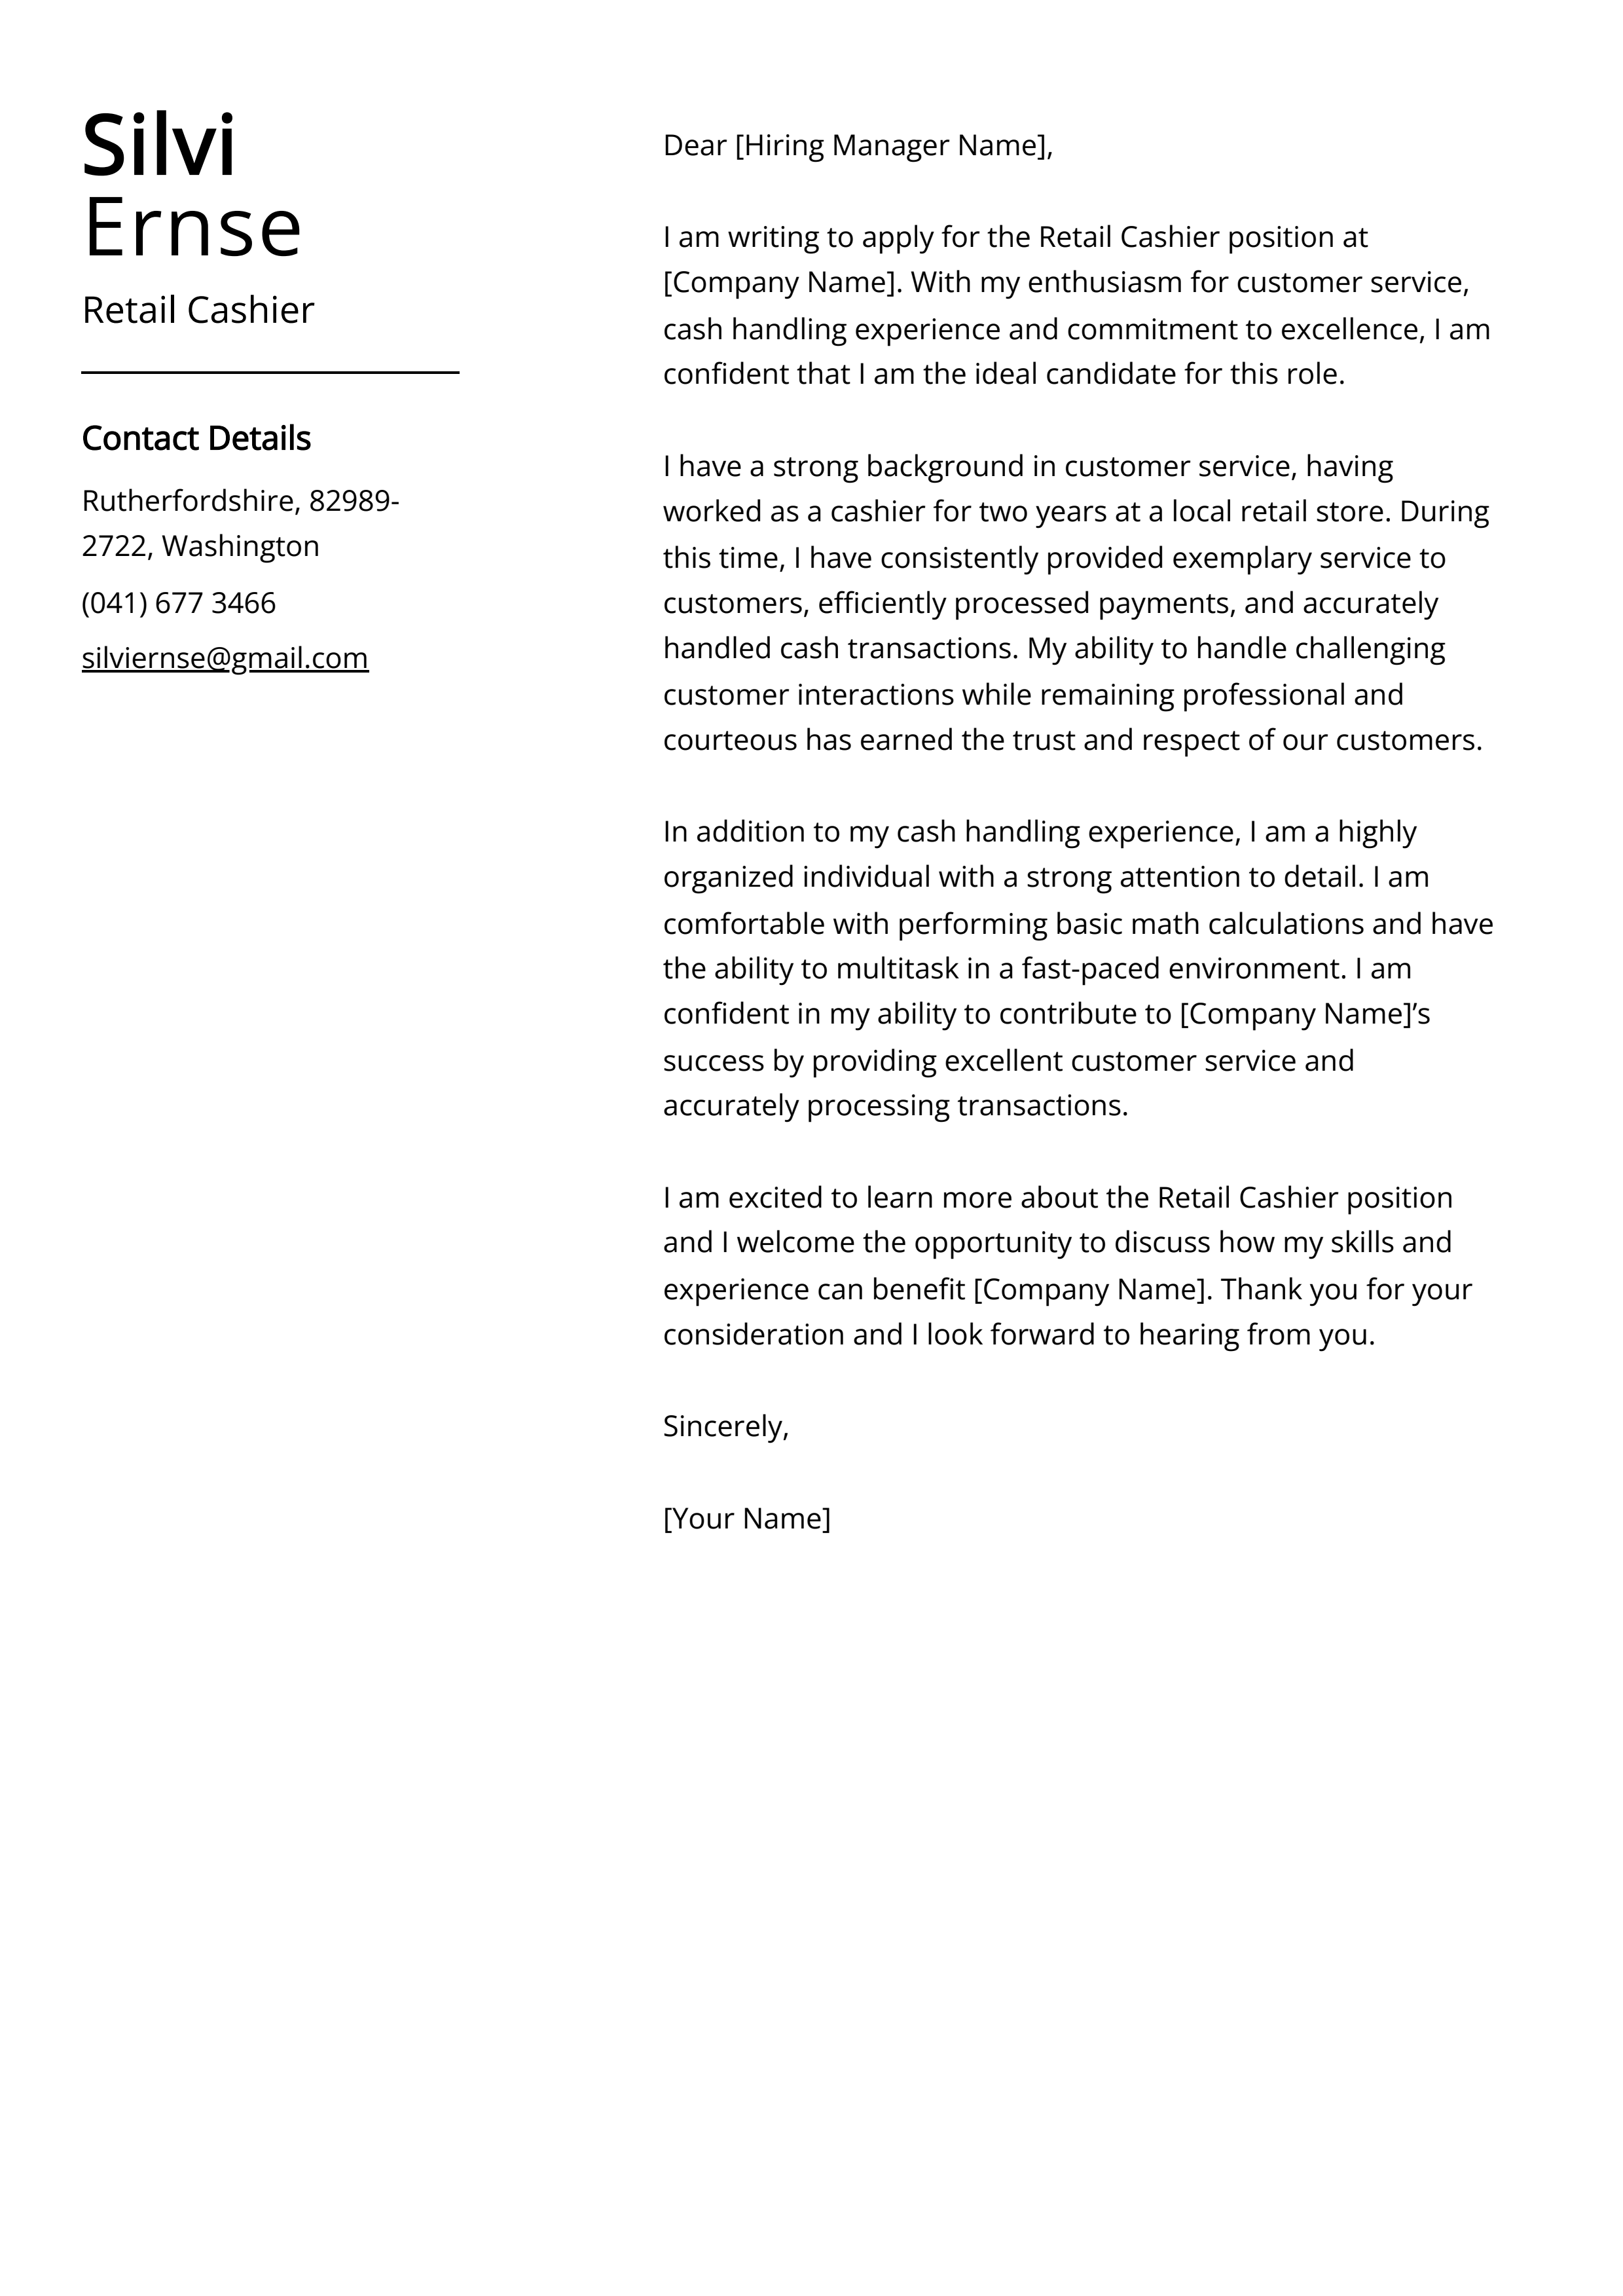 Retail Cashier Cover Letter Example